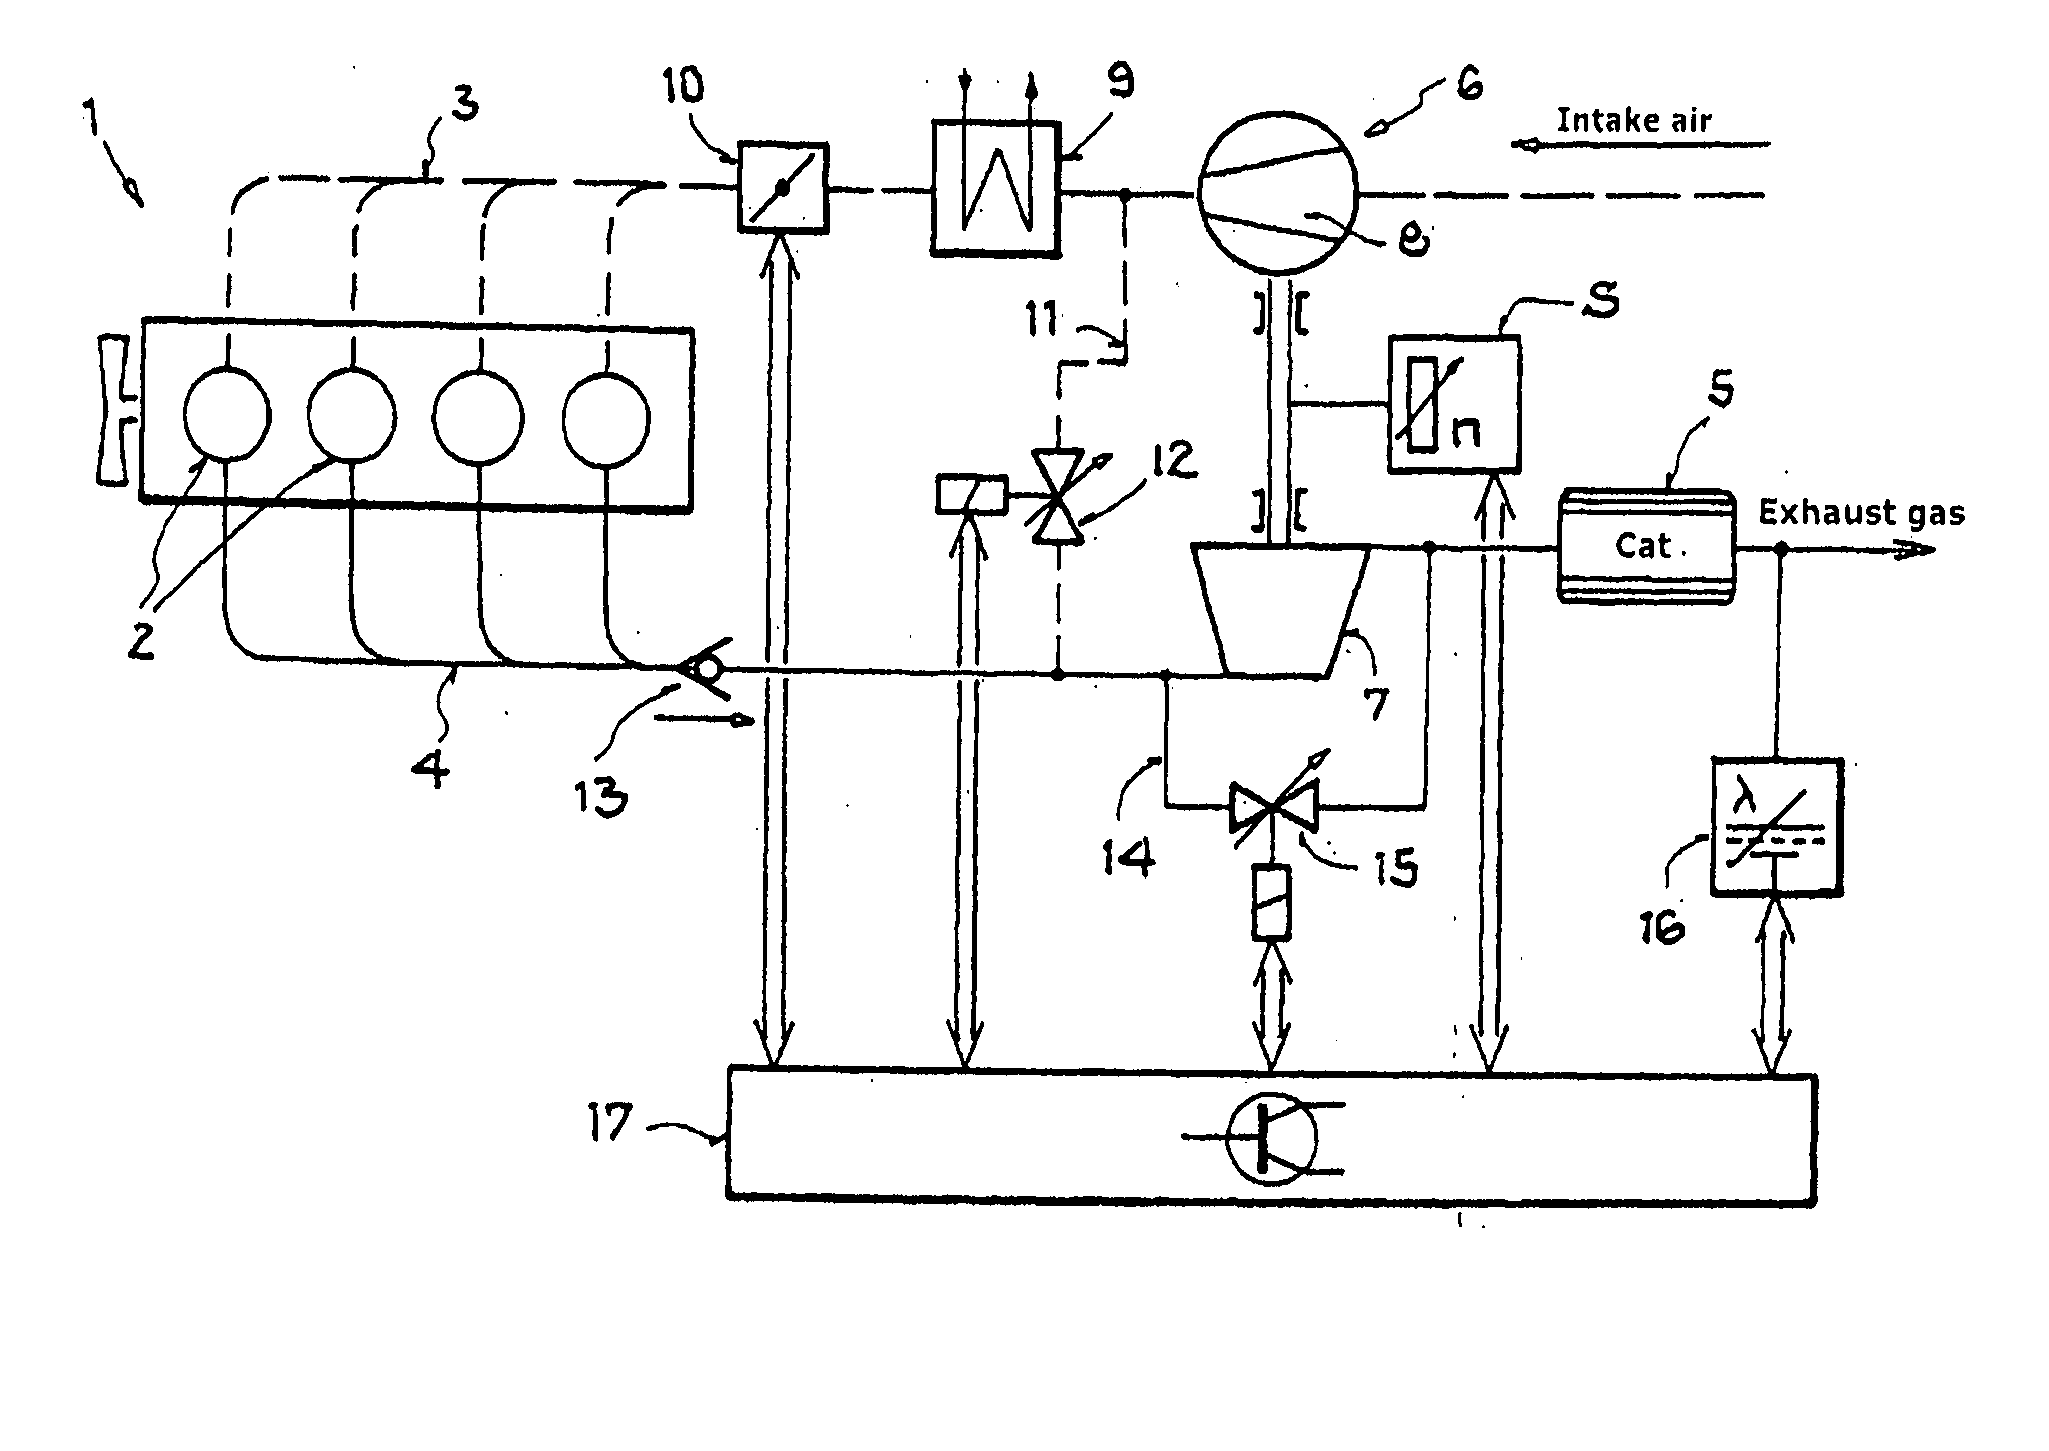 Internal combustion engine with exhaust-gas turbocharger and secondary air injection